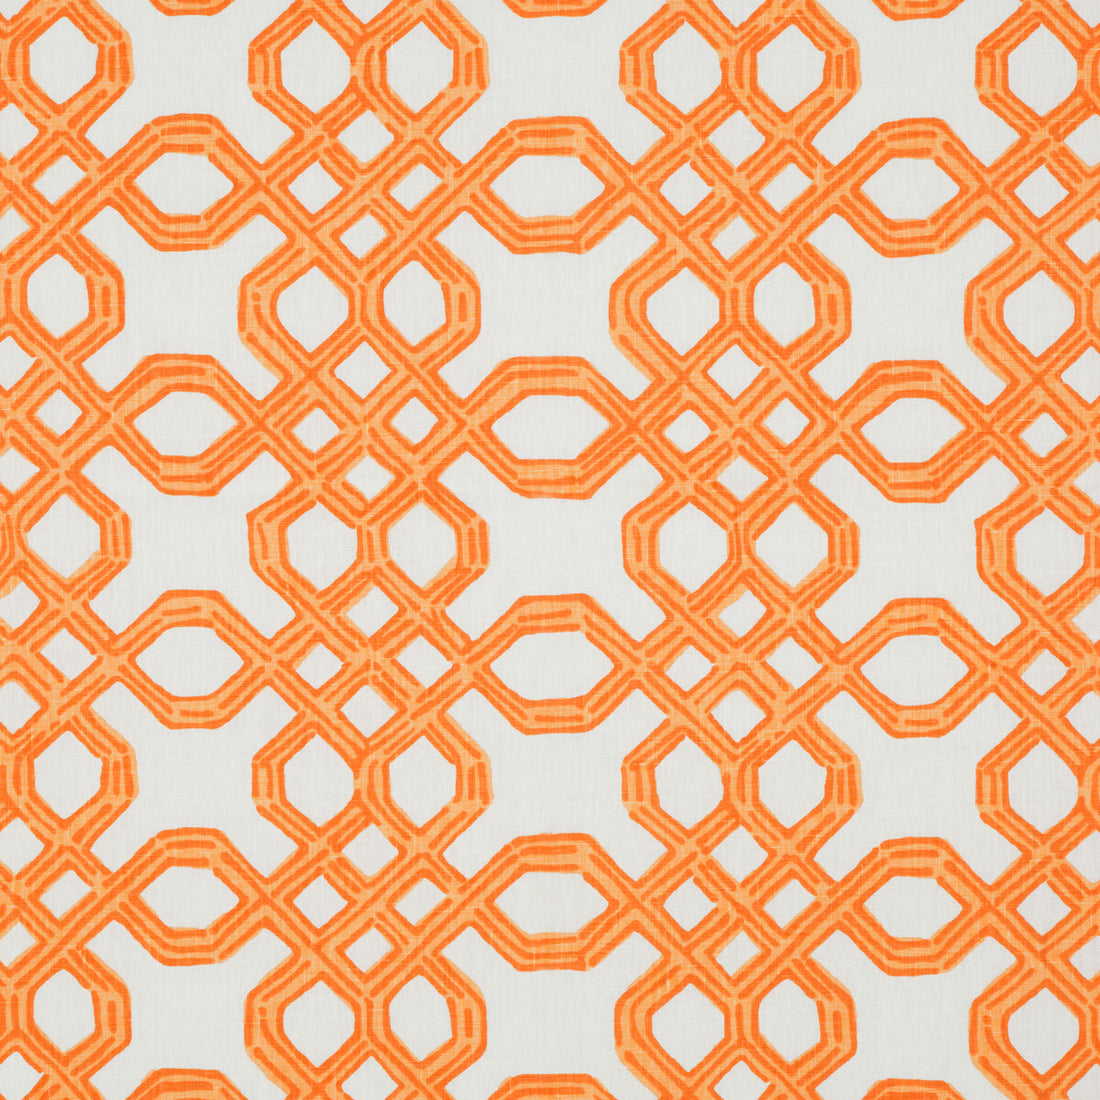 Well Connected fabric in clementine color - pattern 2011101.12.0 - by Lee Jofa in the Lilly Pulitzer II collection